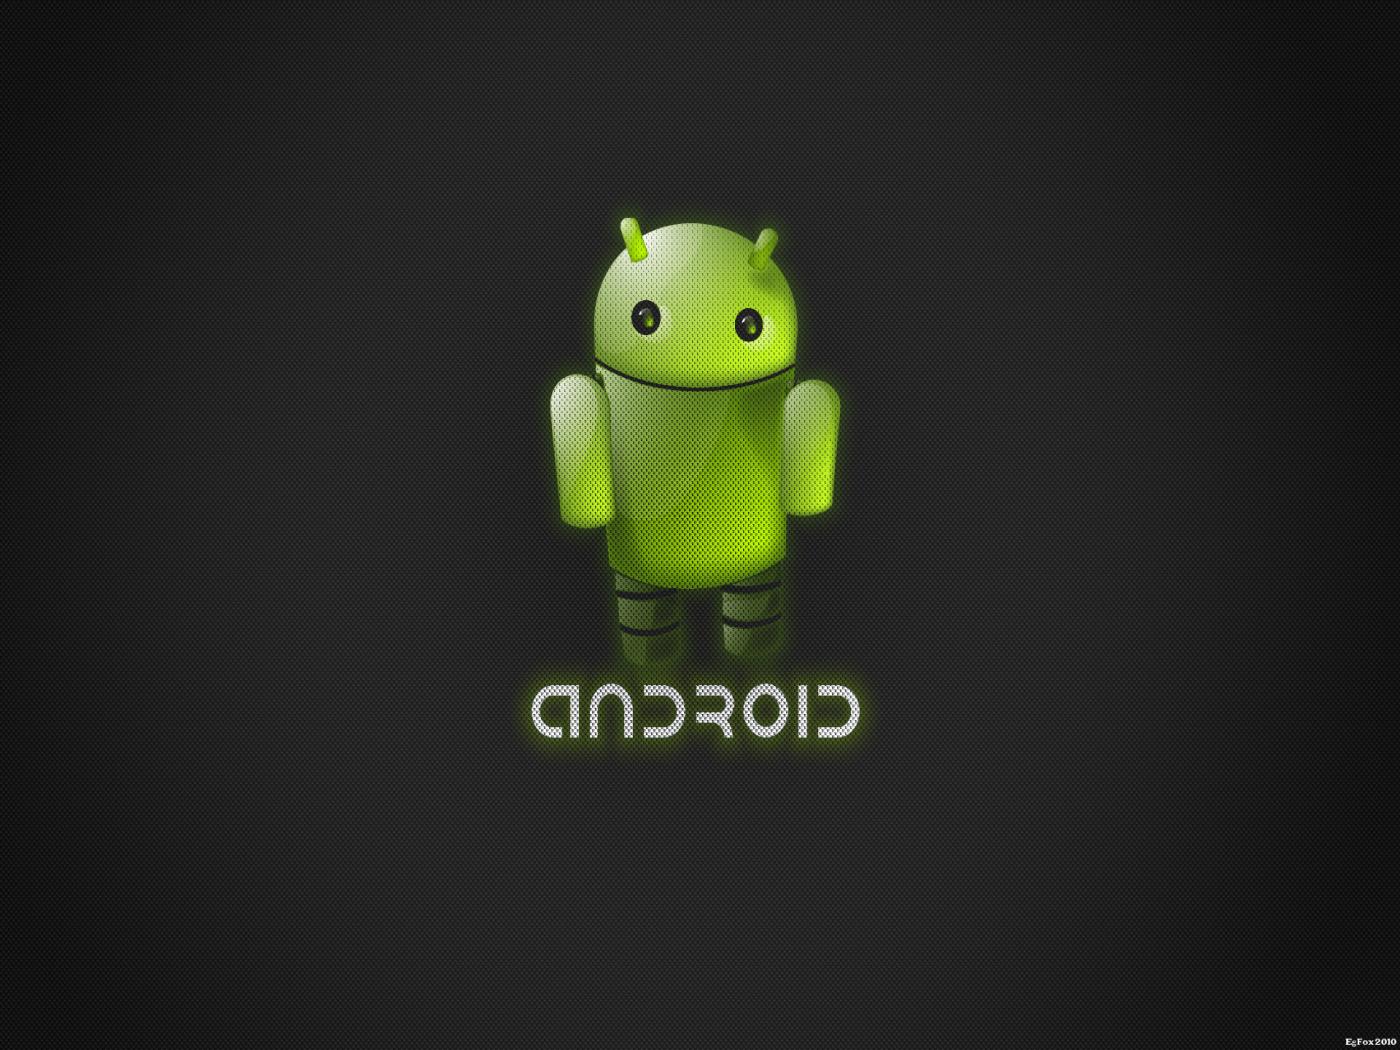 HD Wallpaper For Android Full